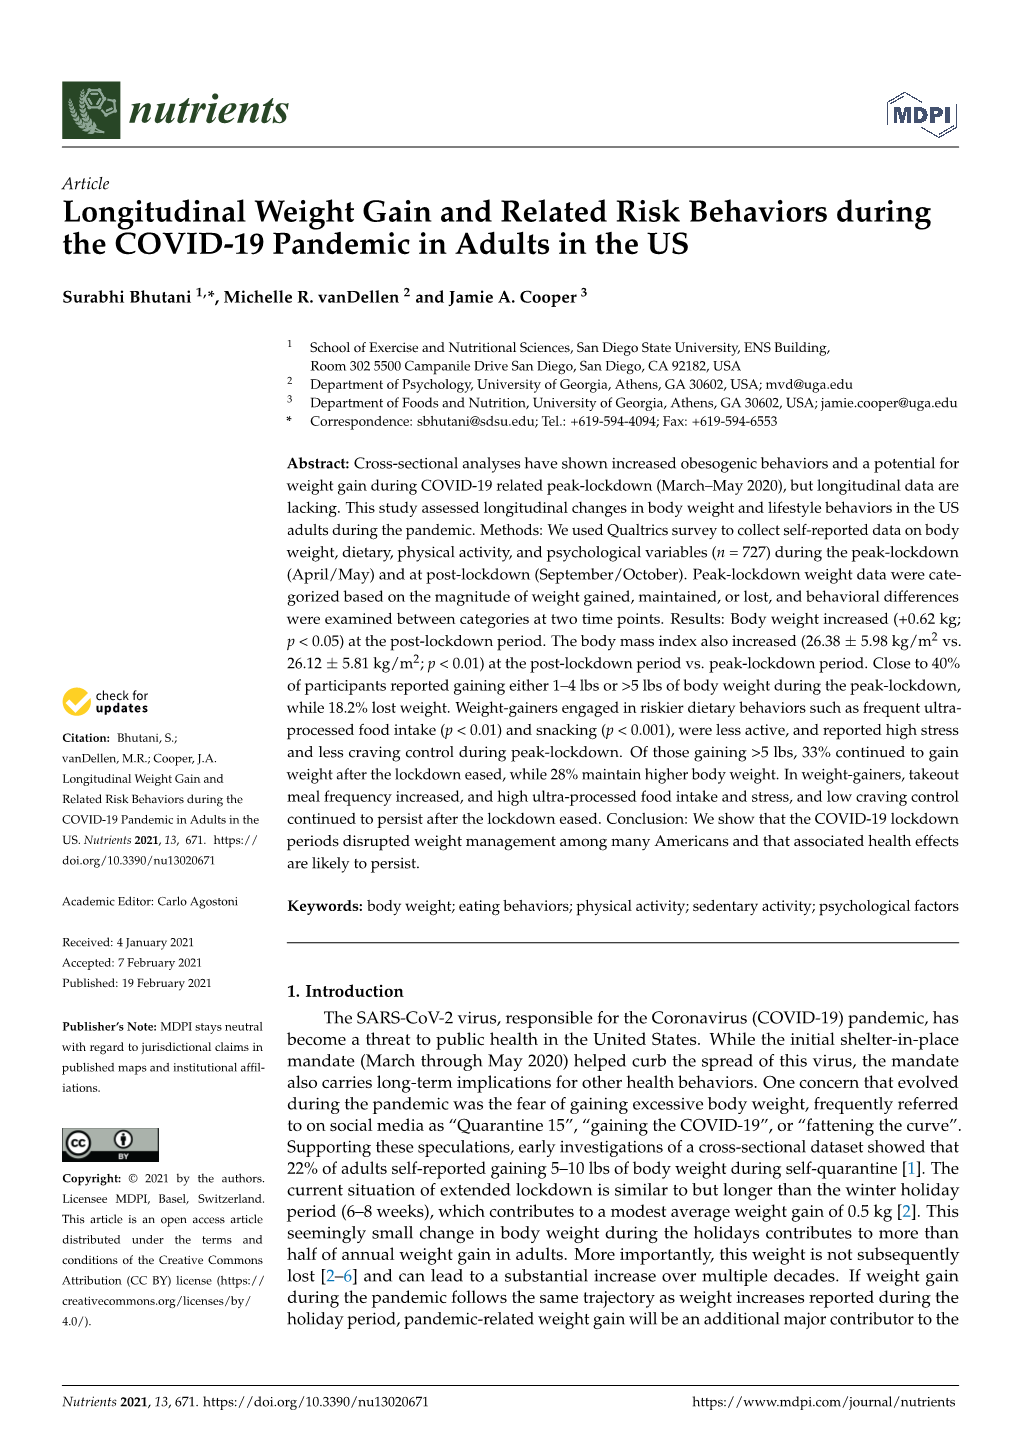 Longitudinal Weight Gain and Related Risk Behaviors During the COVID-19 Pandemic in Adults in the US